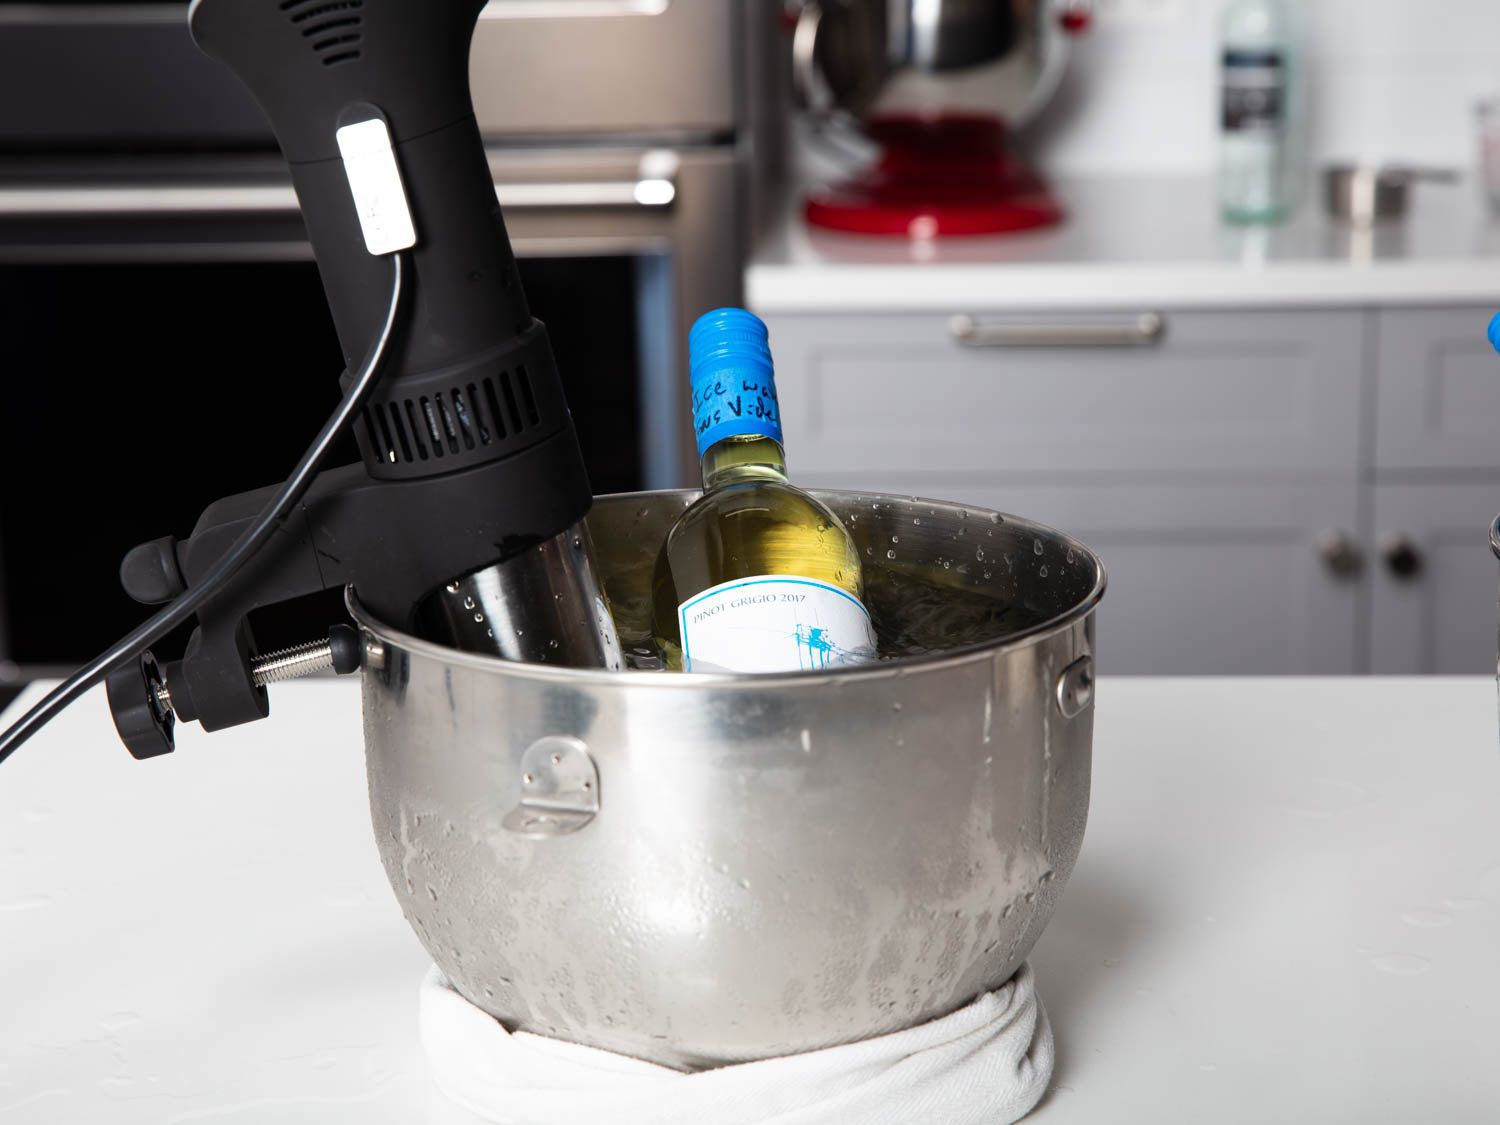 A bottle of white wine in a stand mixer bowl fitted with an immersion circulator.